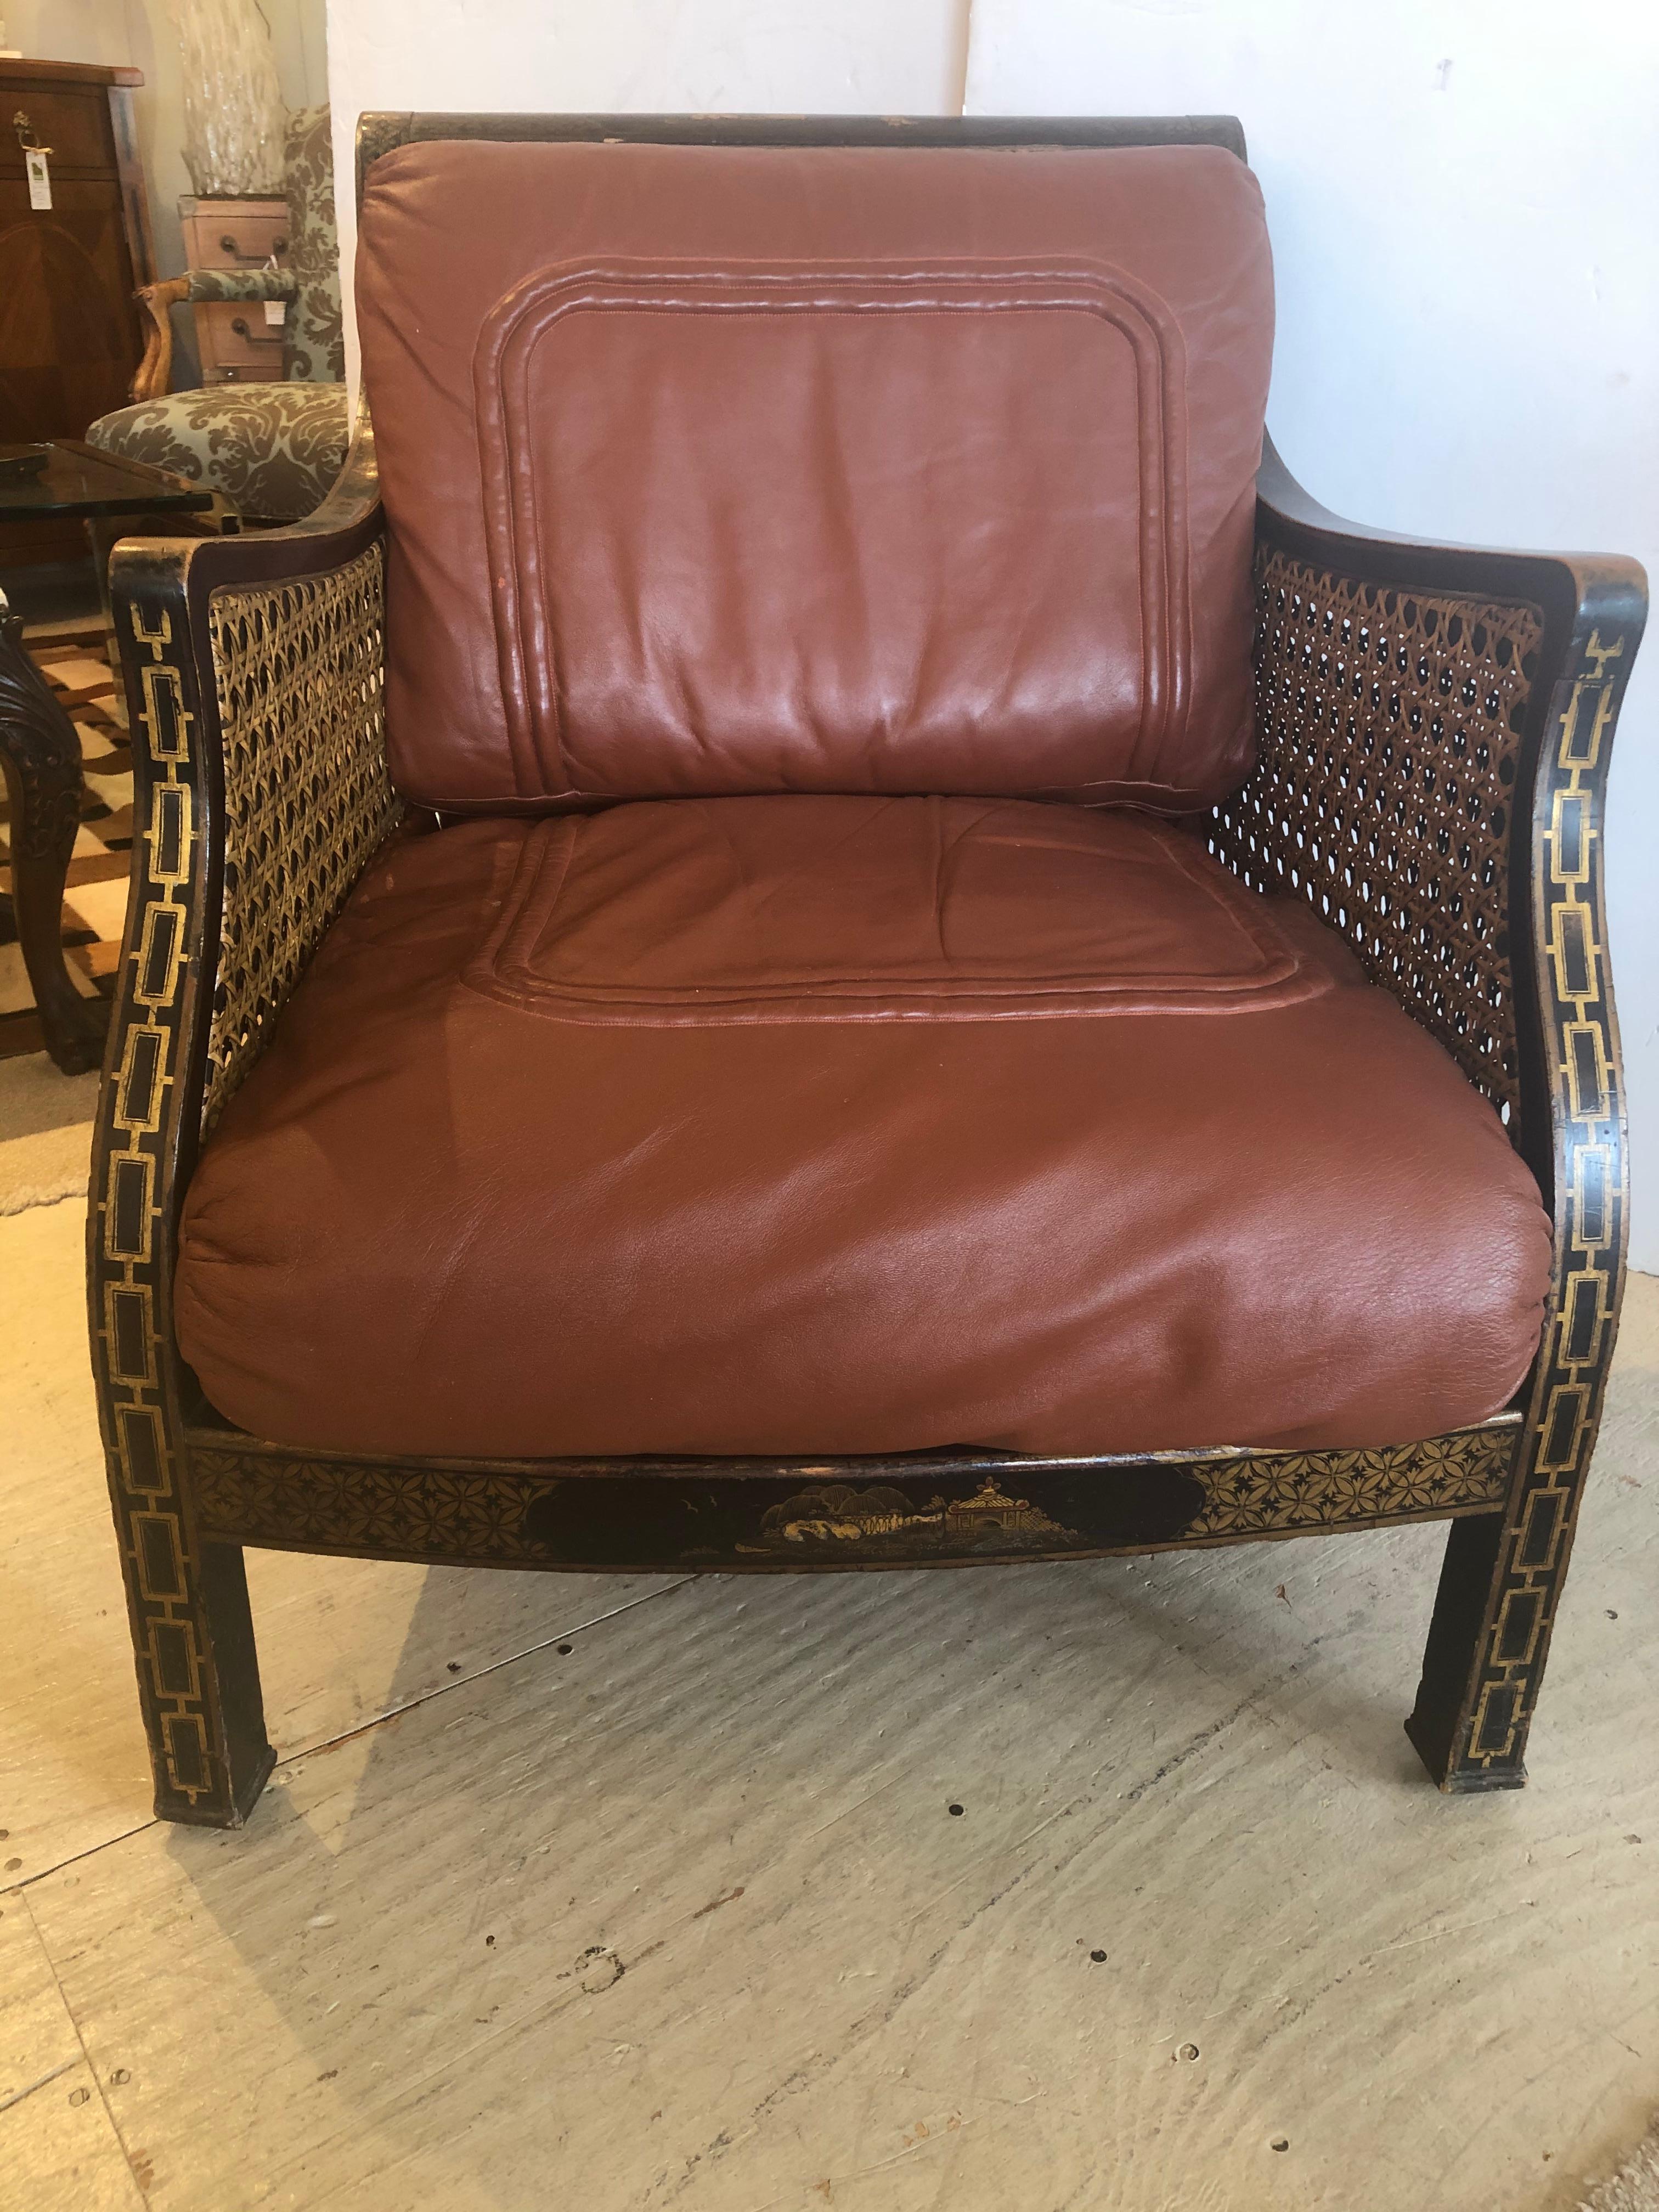 Marvelous luxurious Regency style club or armchair having black and gold chinoiserie frame, double caned body in amazing condition, and two down filled cognac colored soft kid leather cushions. You never see a chair like this. Sure to make you swoon.